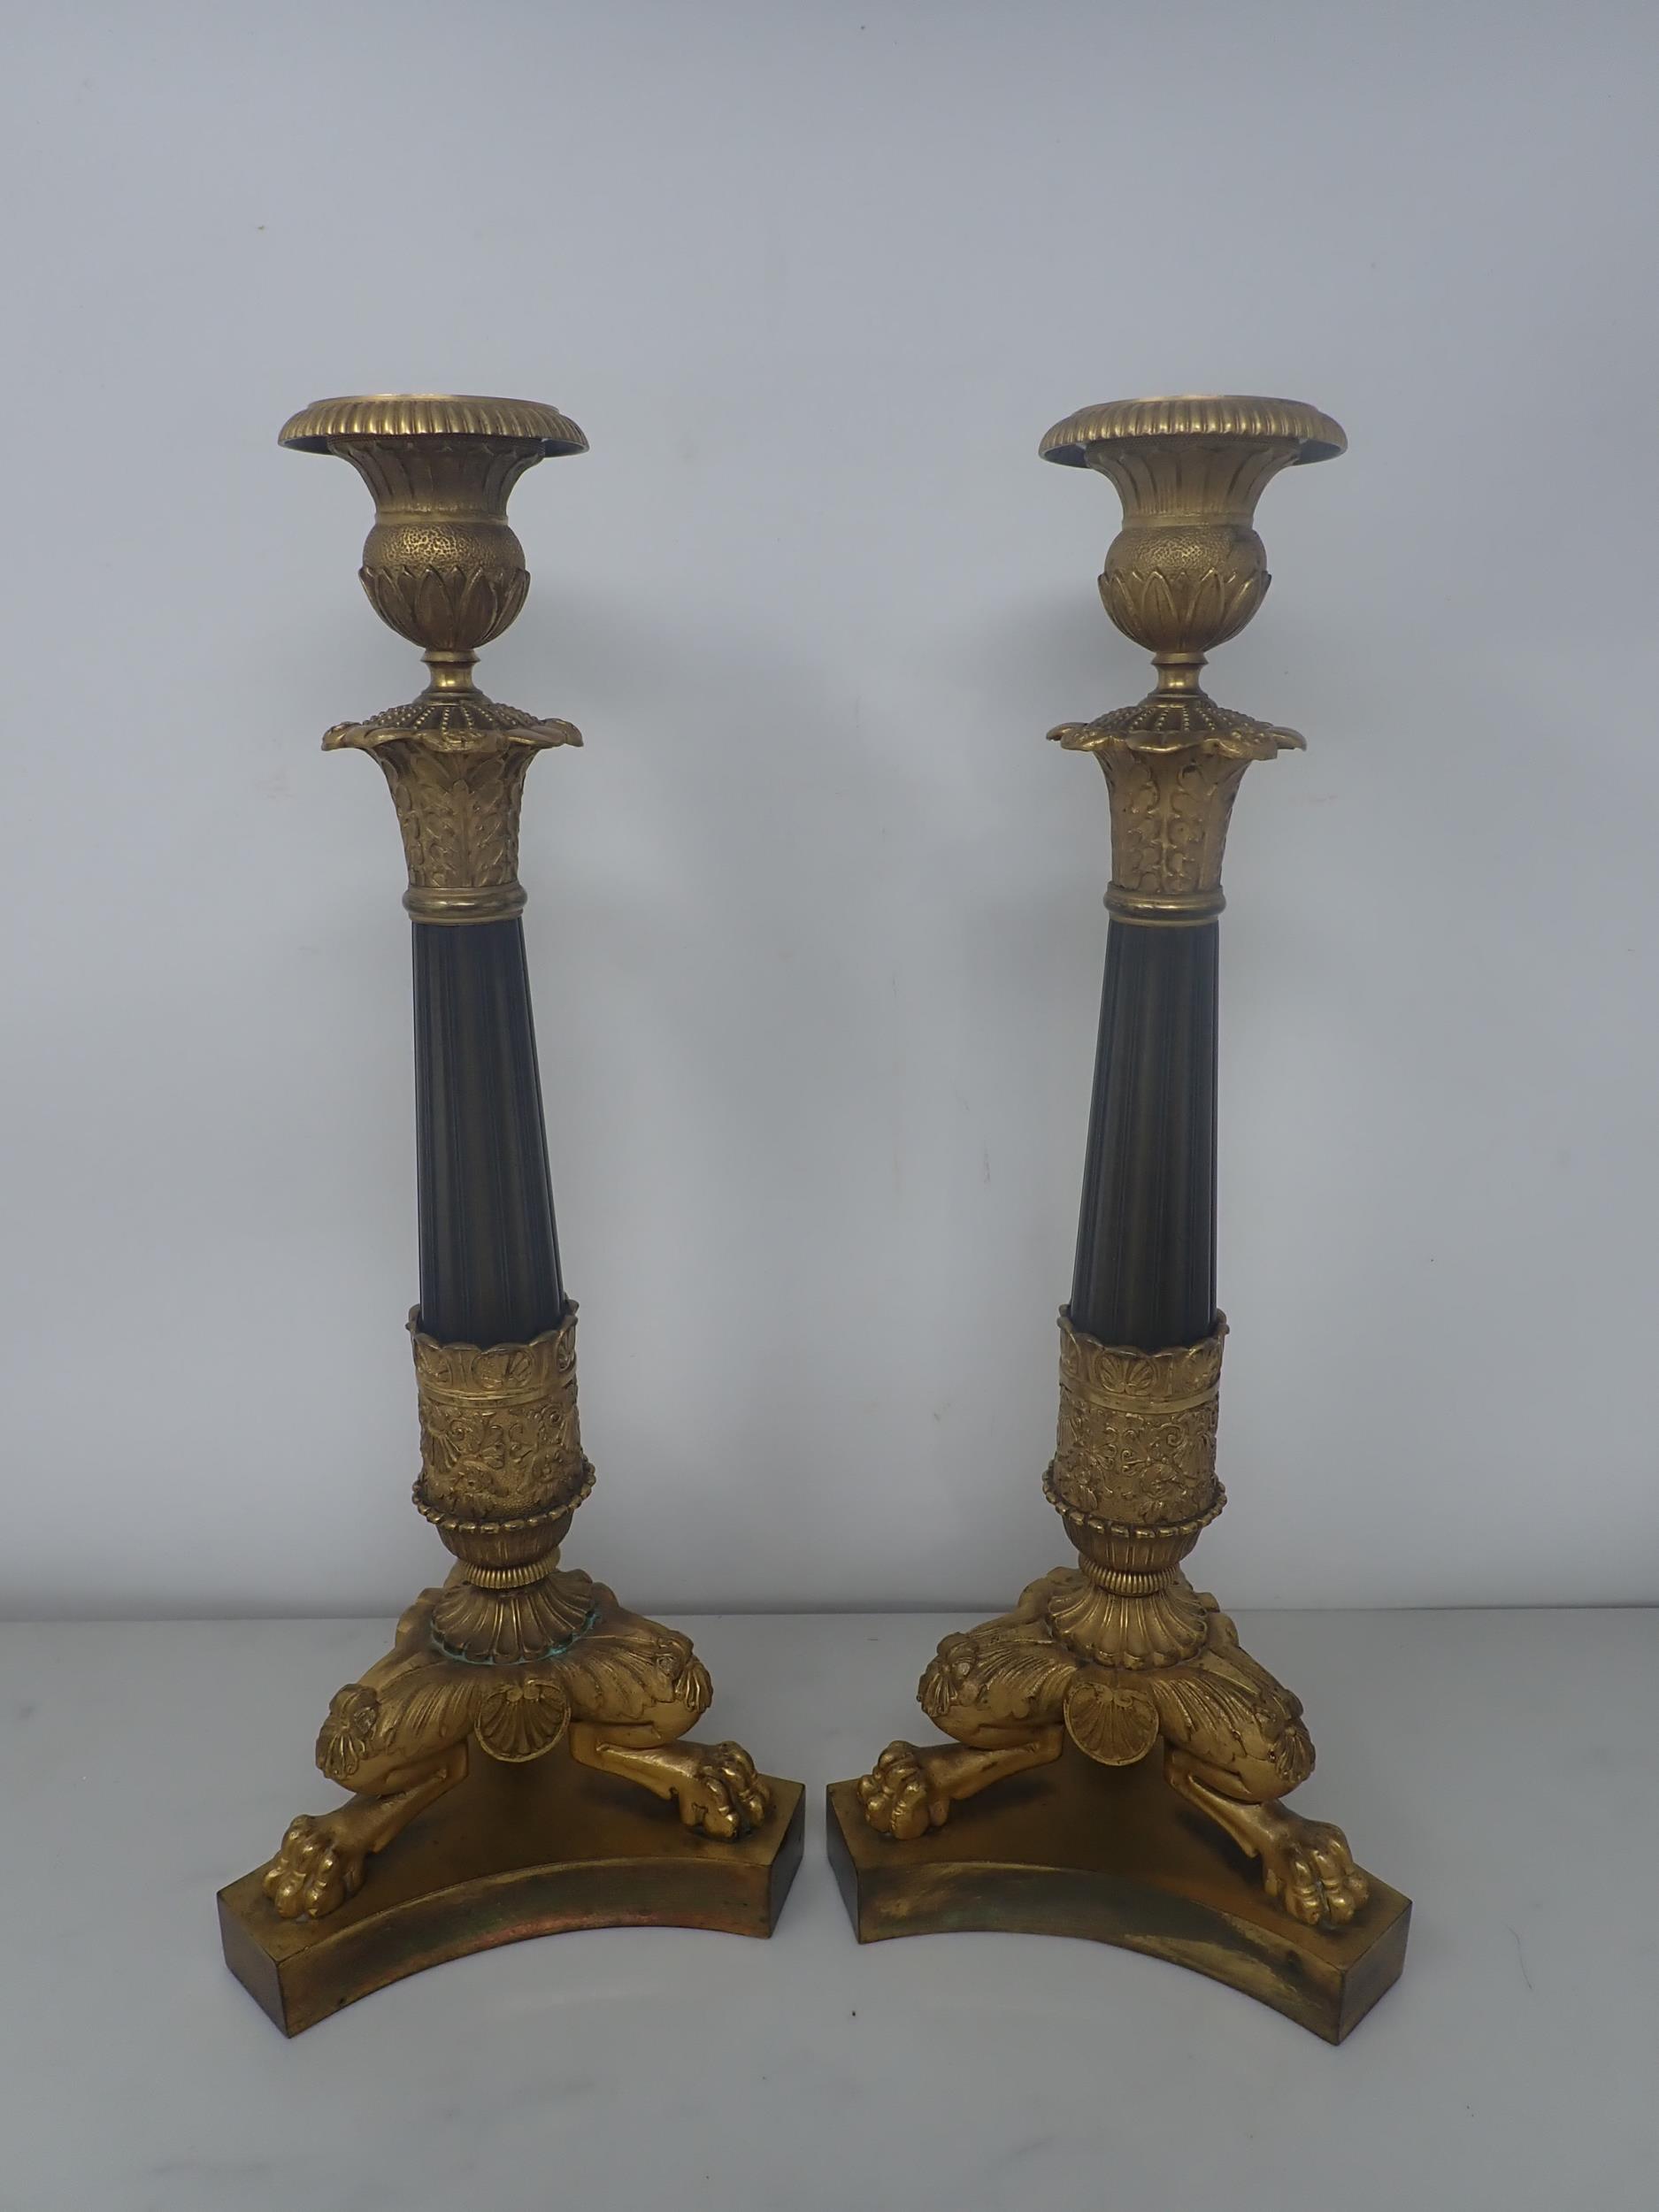 A pair of French Empire Candlesticks in ormolu and bronze, with classical mouldings, plain bronze